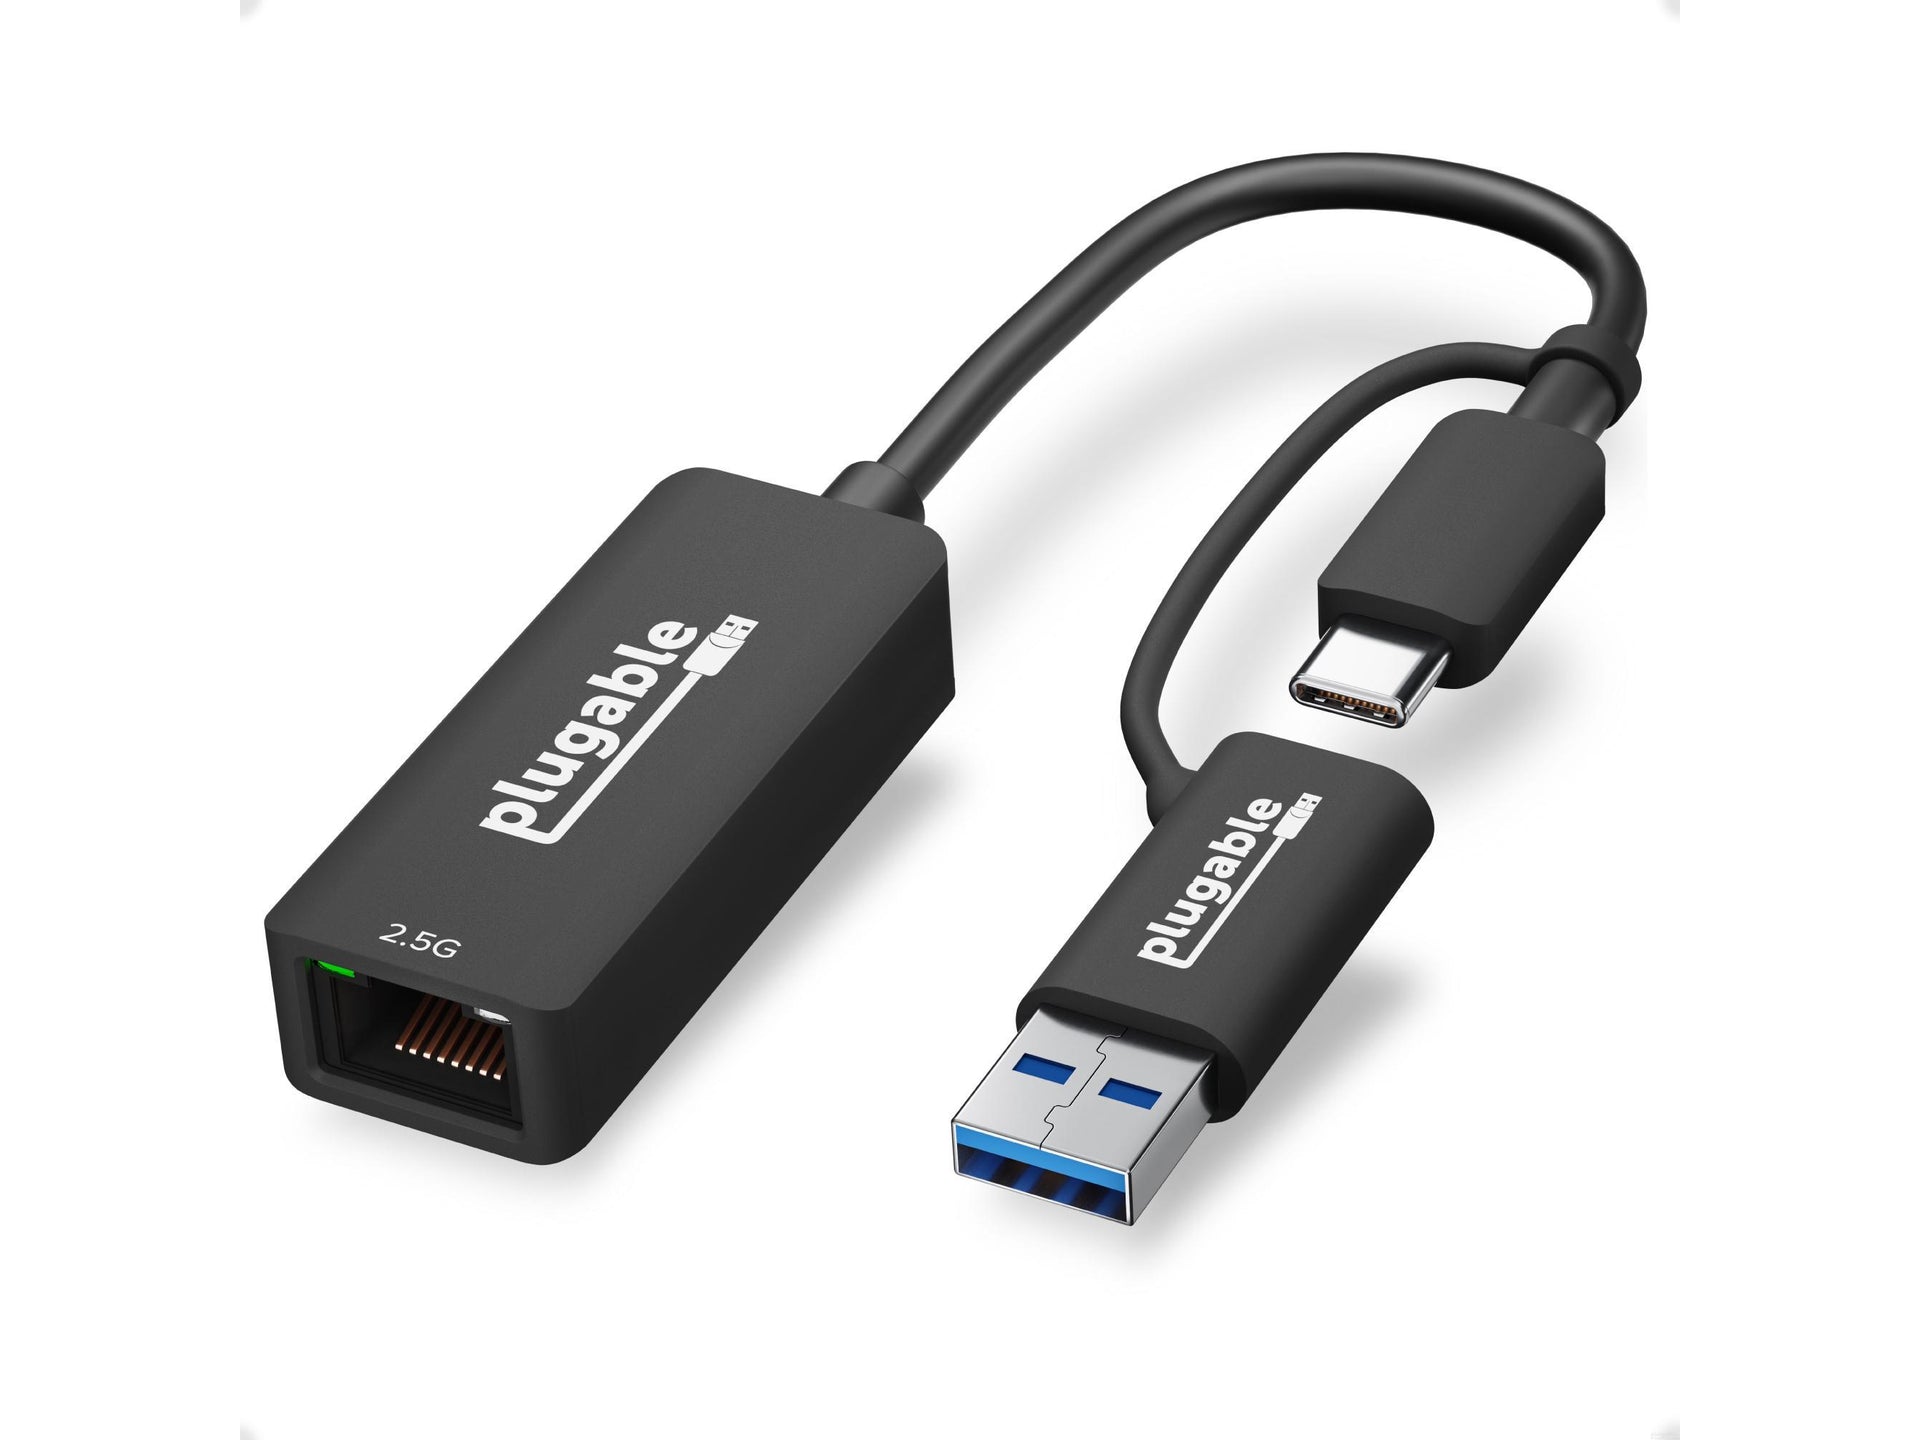 Which Ethernet adapter for speeds above 100 Mbps? : r/firetvstick